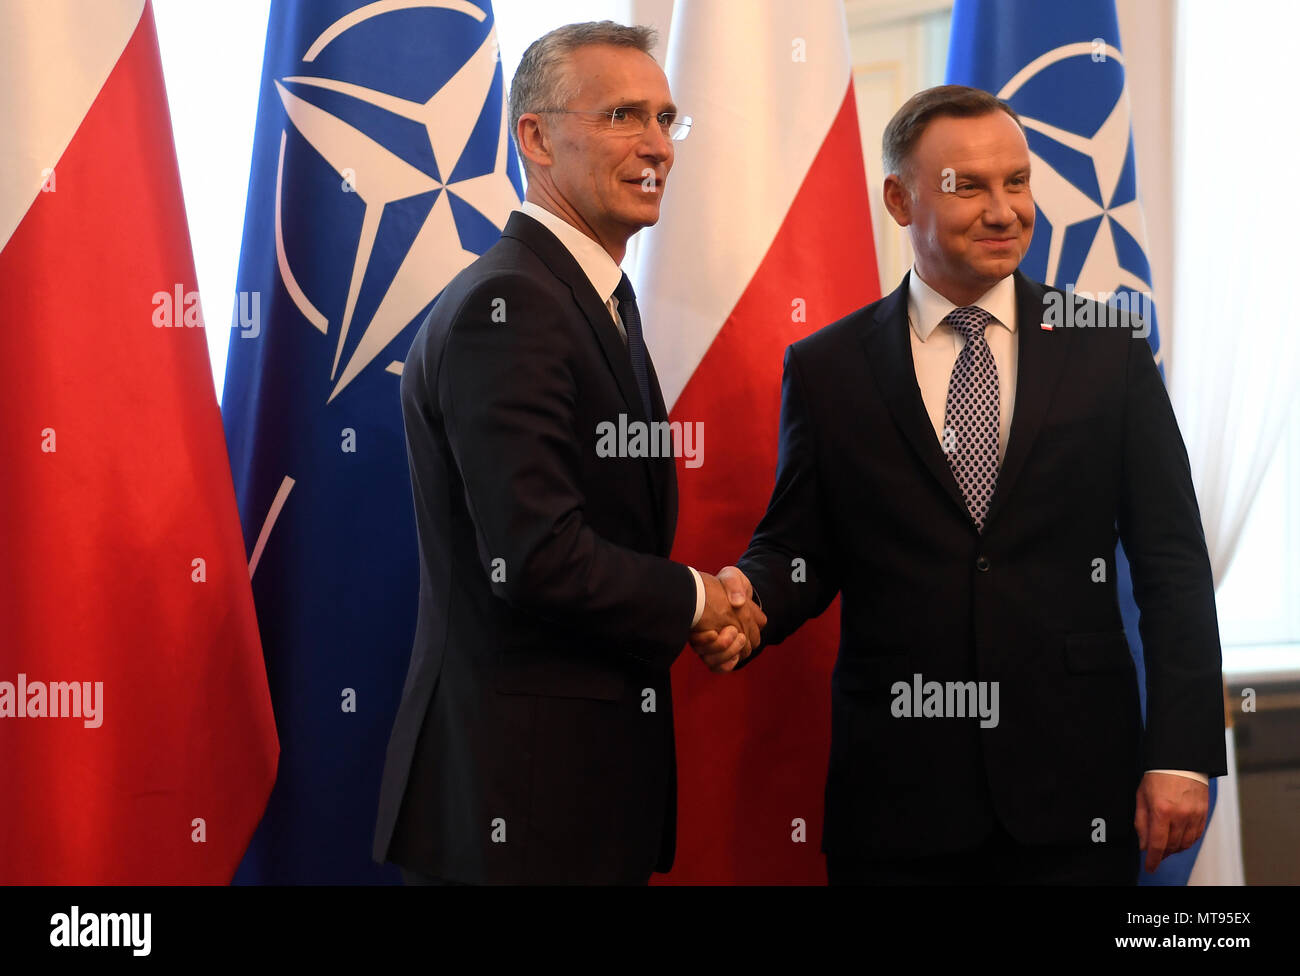 Warsaw, Poland. 28th May, 2018. Polish President Andrzej Duda (R) shakes hands with NATO Secretary General Jens Stoltenberg at Belweder Palace in Warsaw, Poland, on May 28, 2018. Credit: Maciej Gillert/Xinhua/Alamy Live News Stock Photo